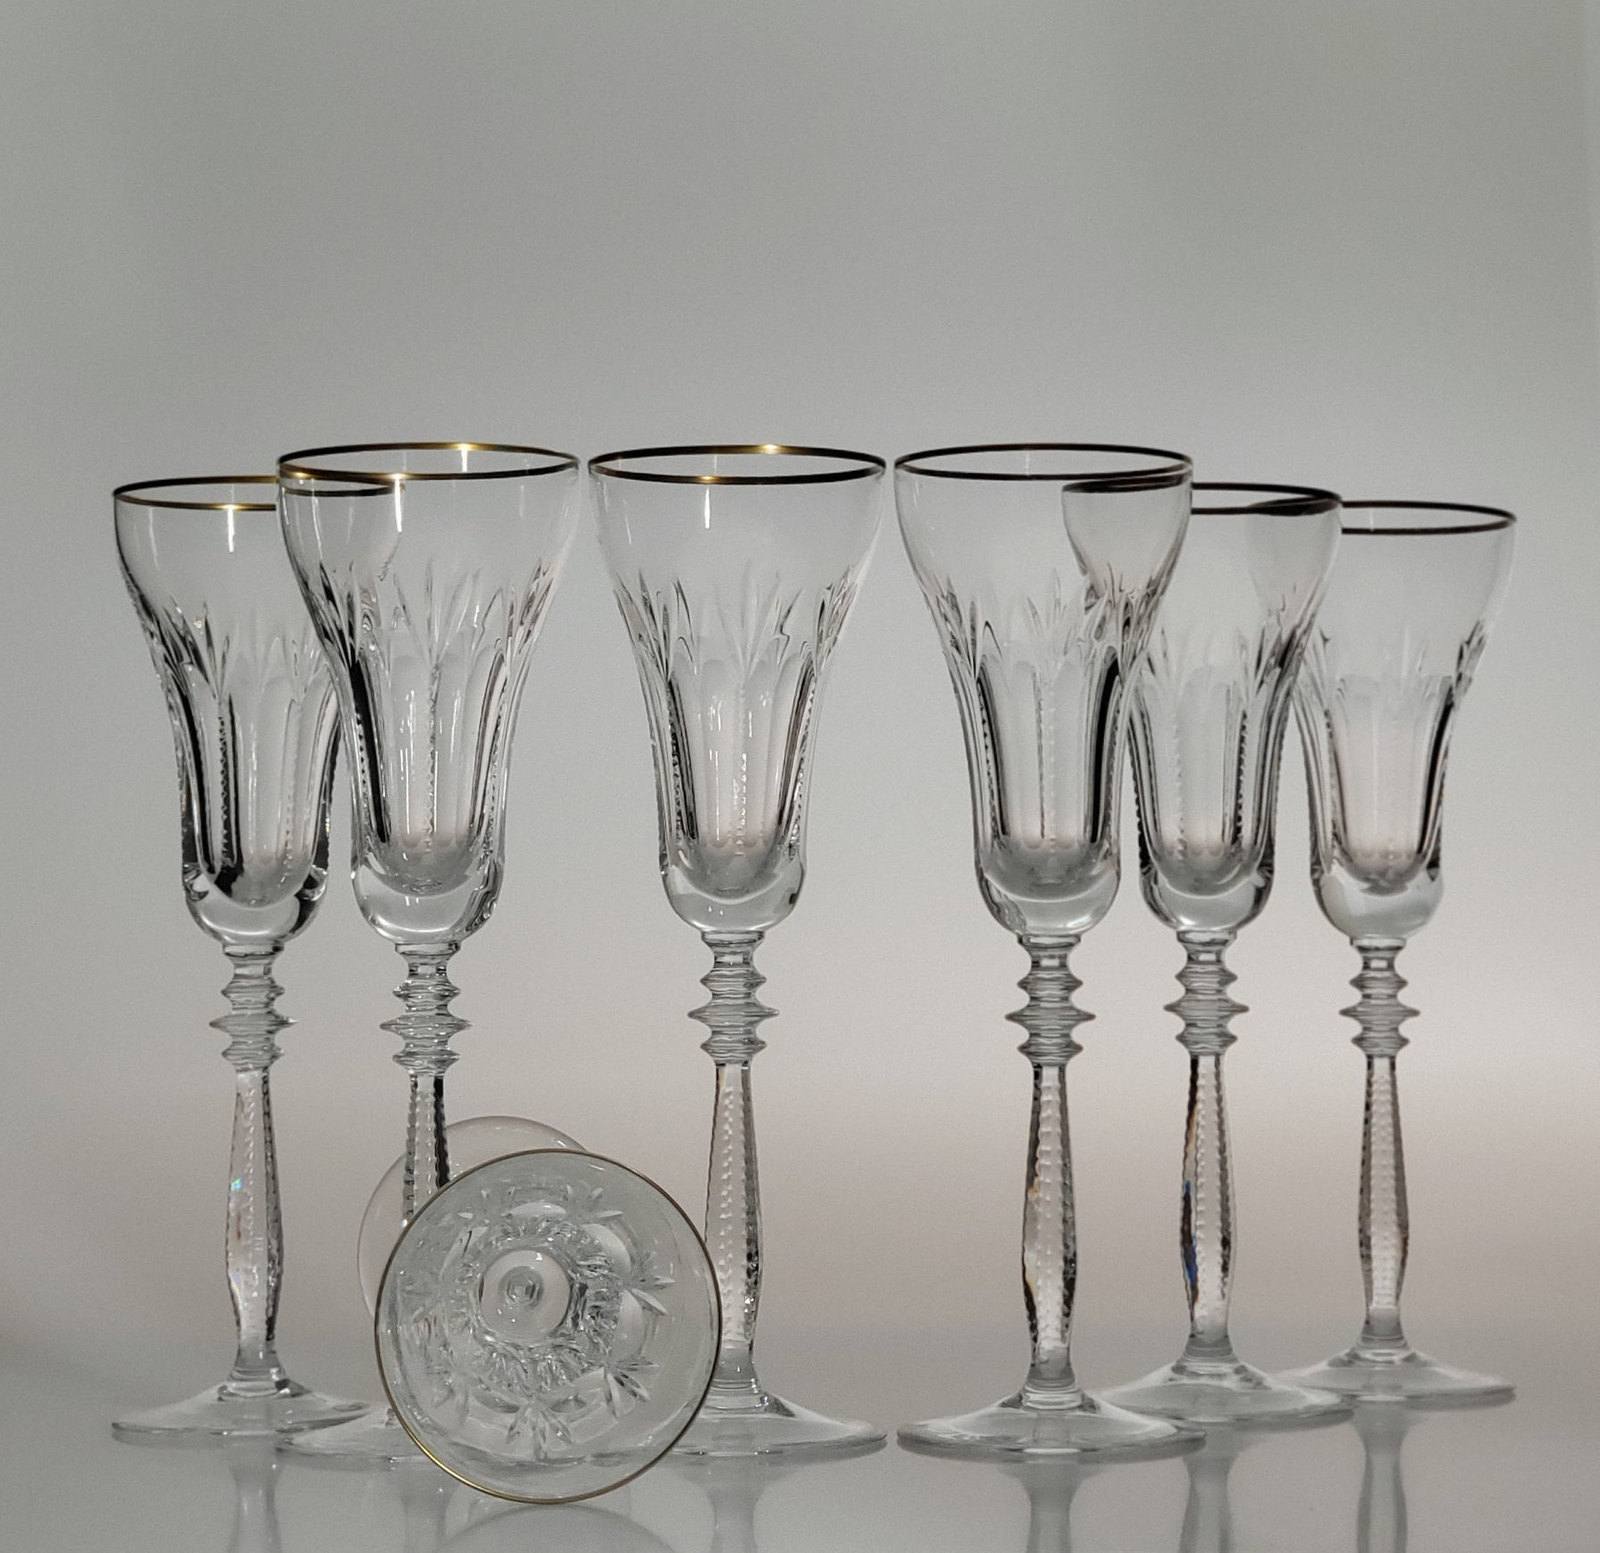 Spode Sinfonie - Symphony Champagne Flutes  | Set of 7 - $245.00